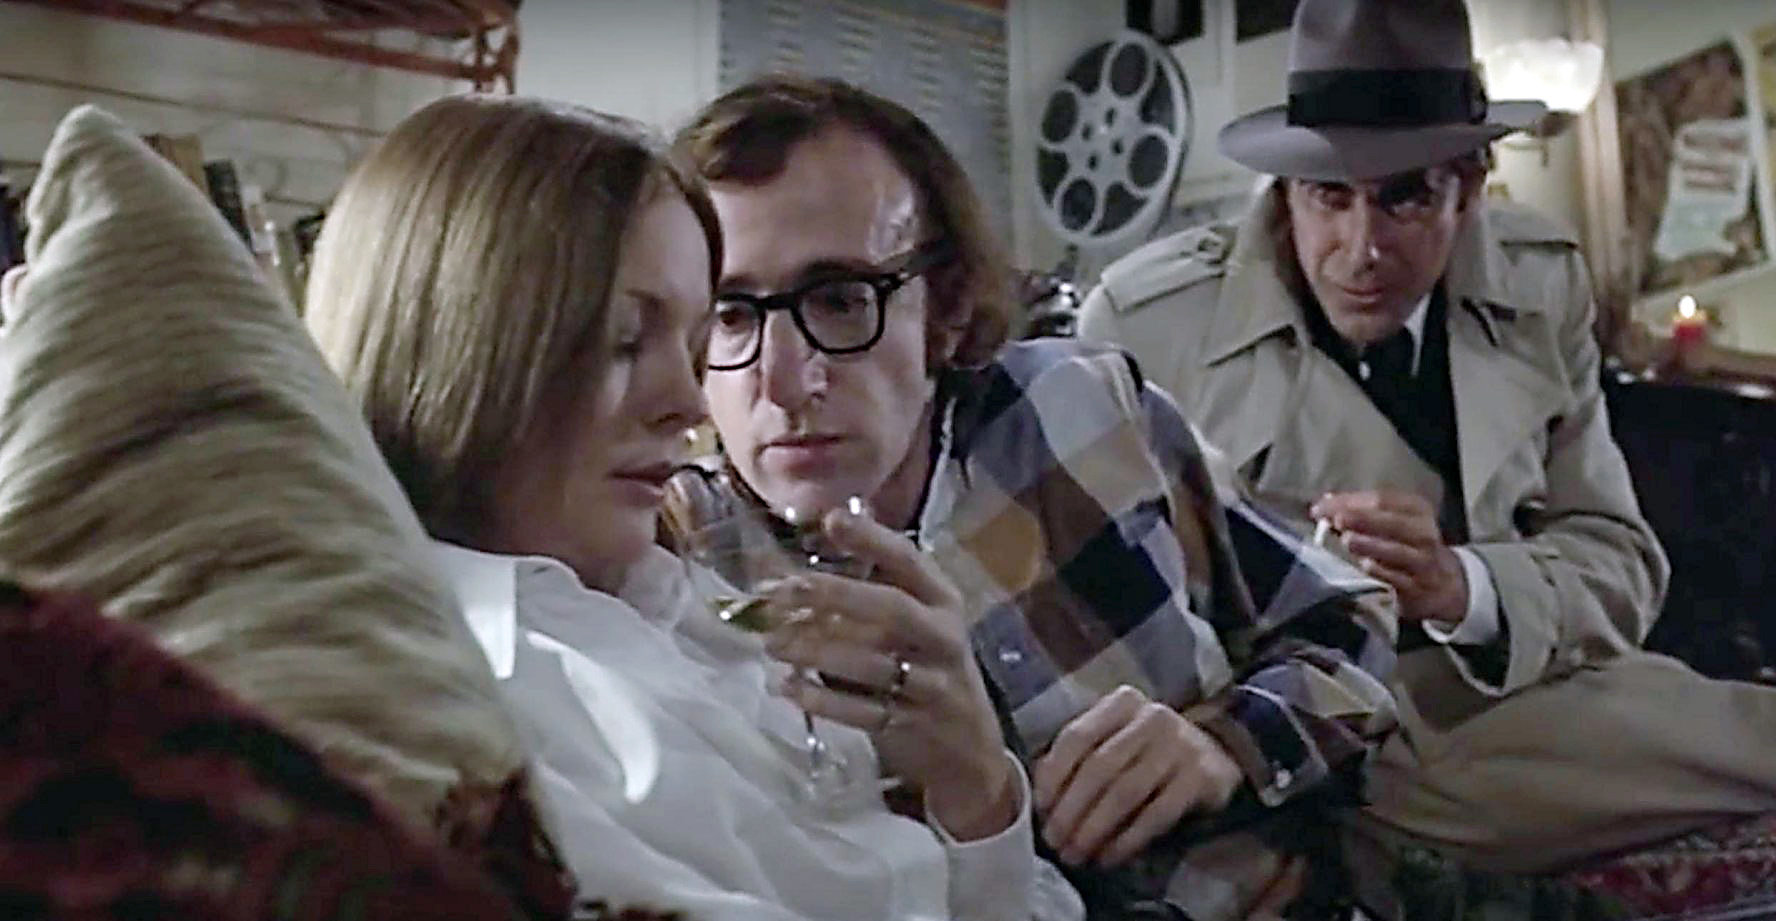 movies that aged poorly - Most Woody Allen movies